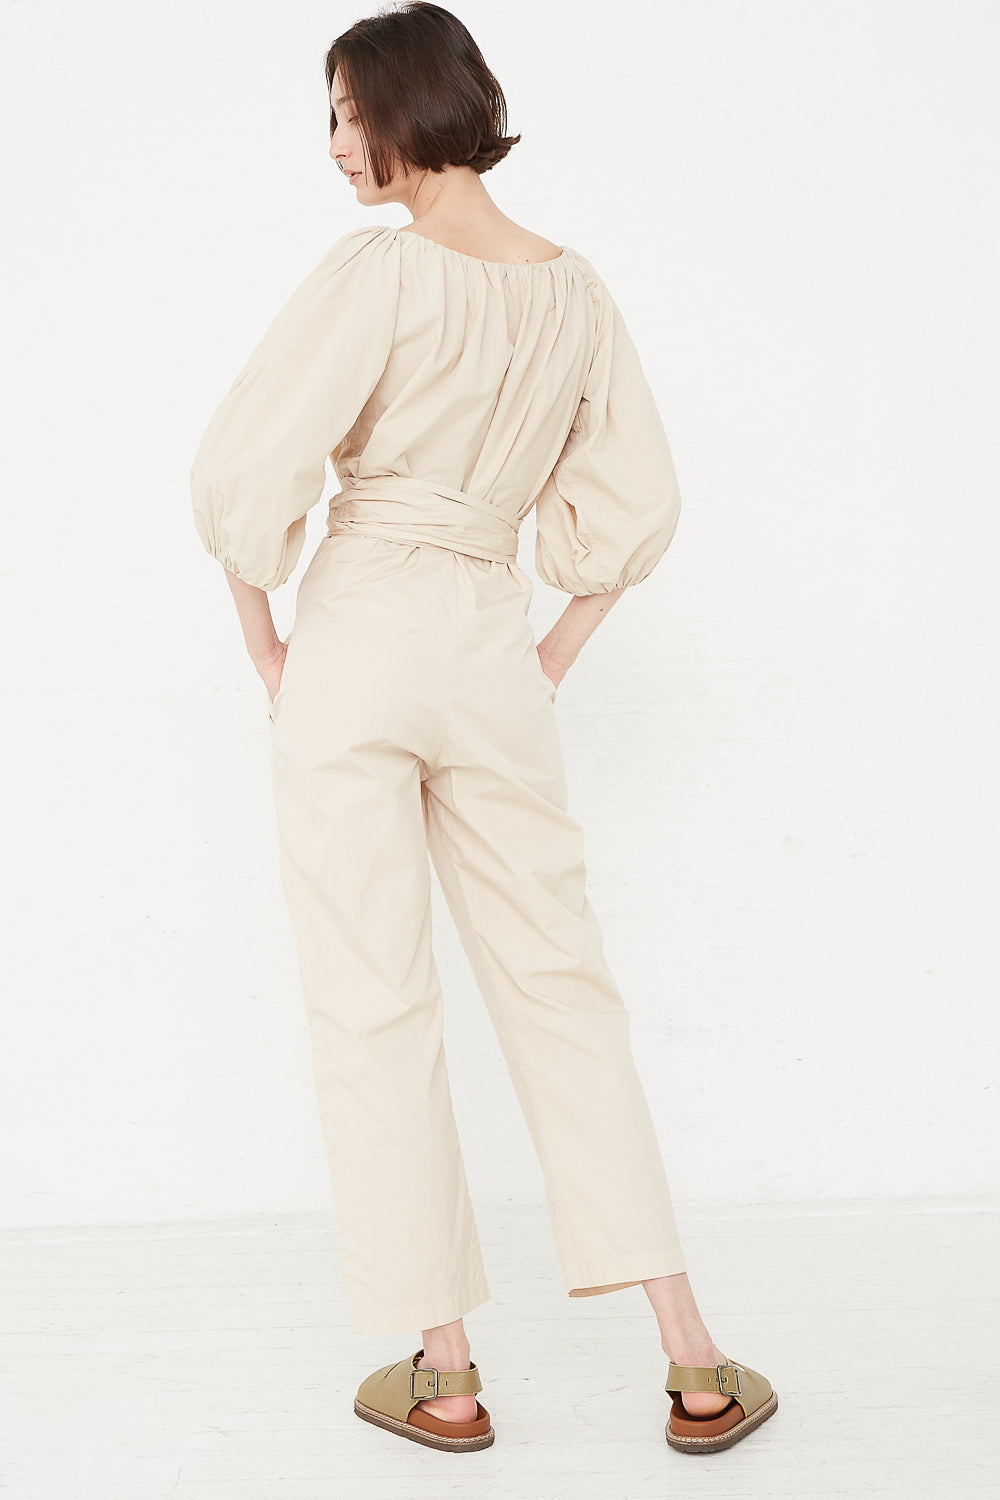 Cosmic Wonder - Suvin Cotton Broadcloth Wrap Pant in Beeswax back view